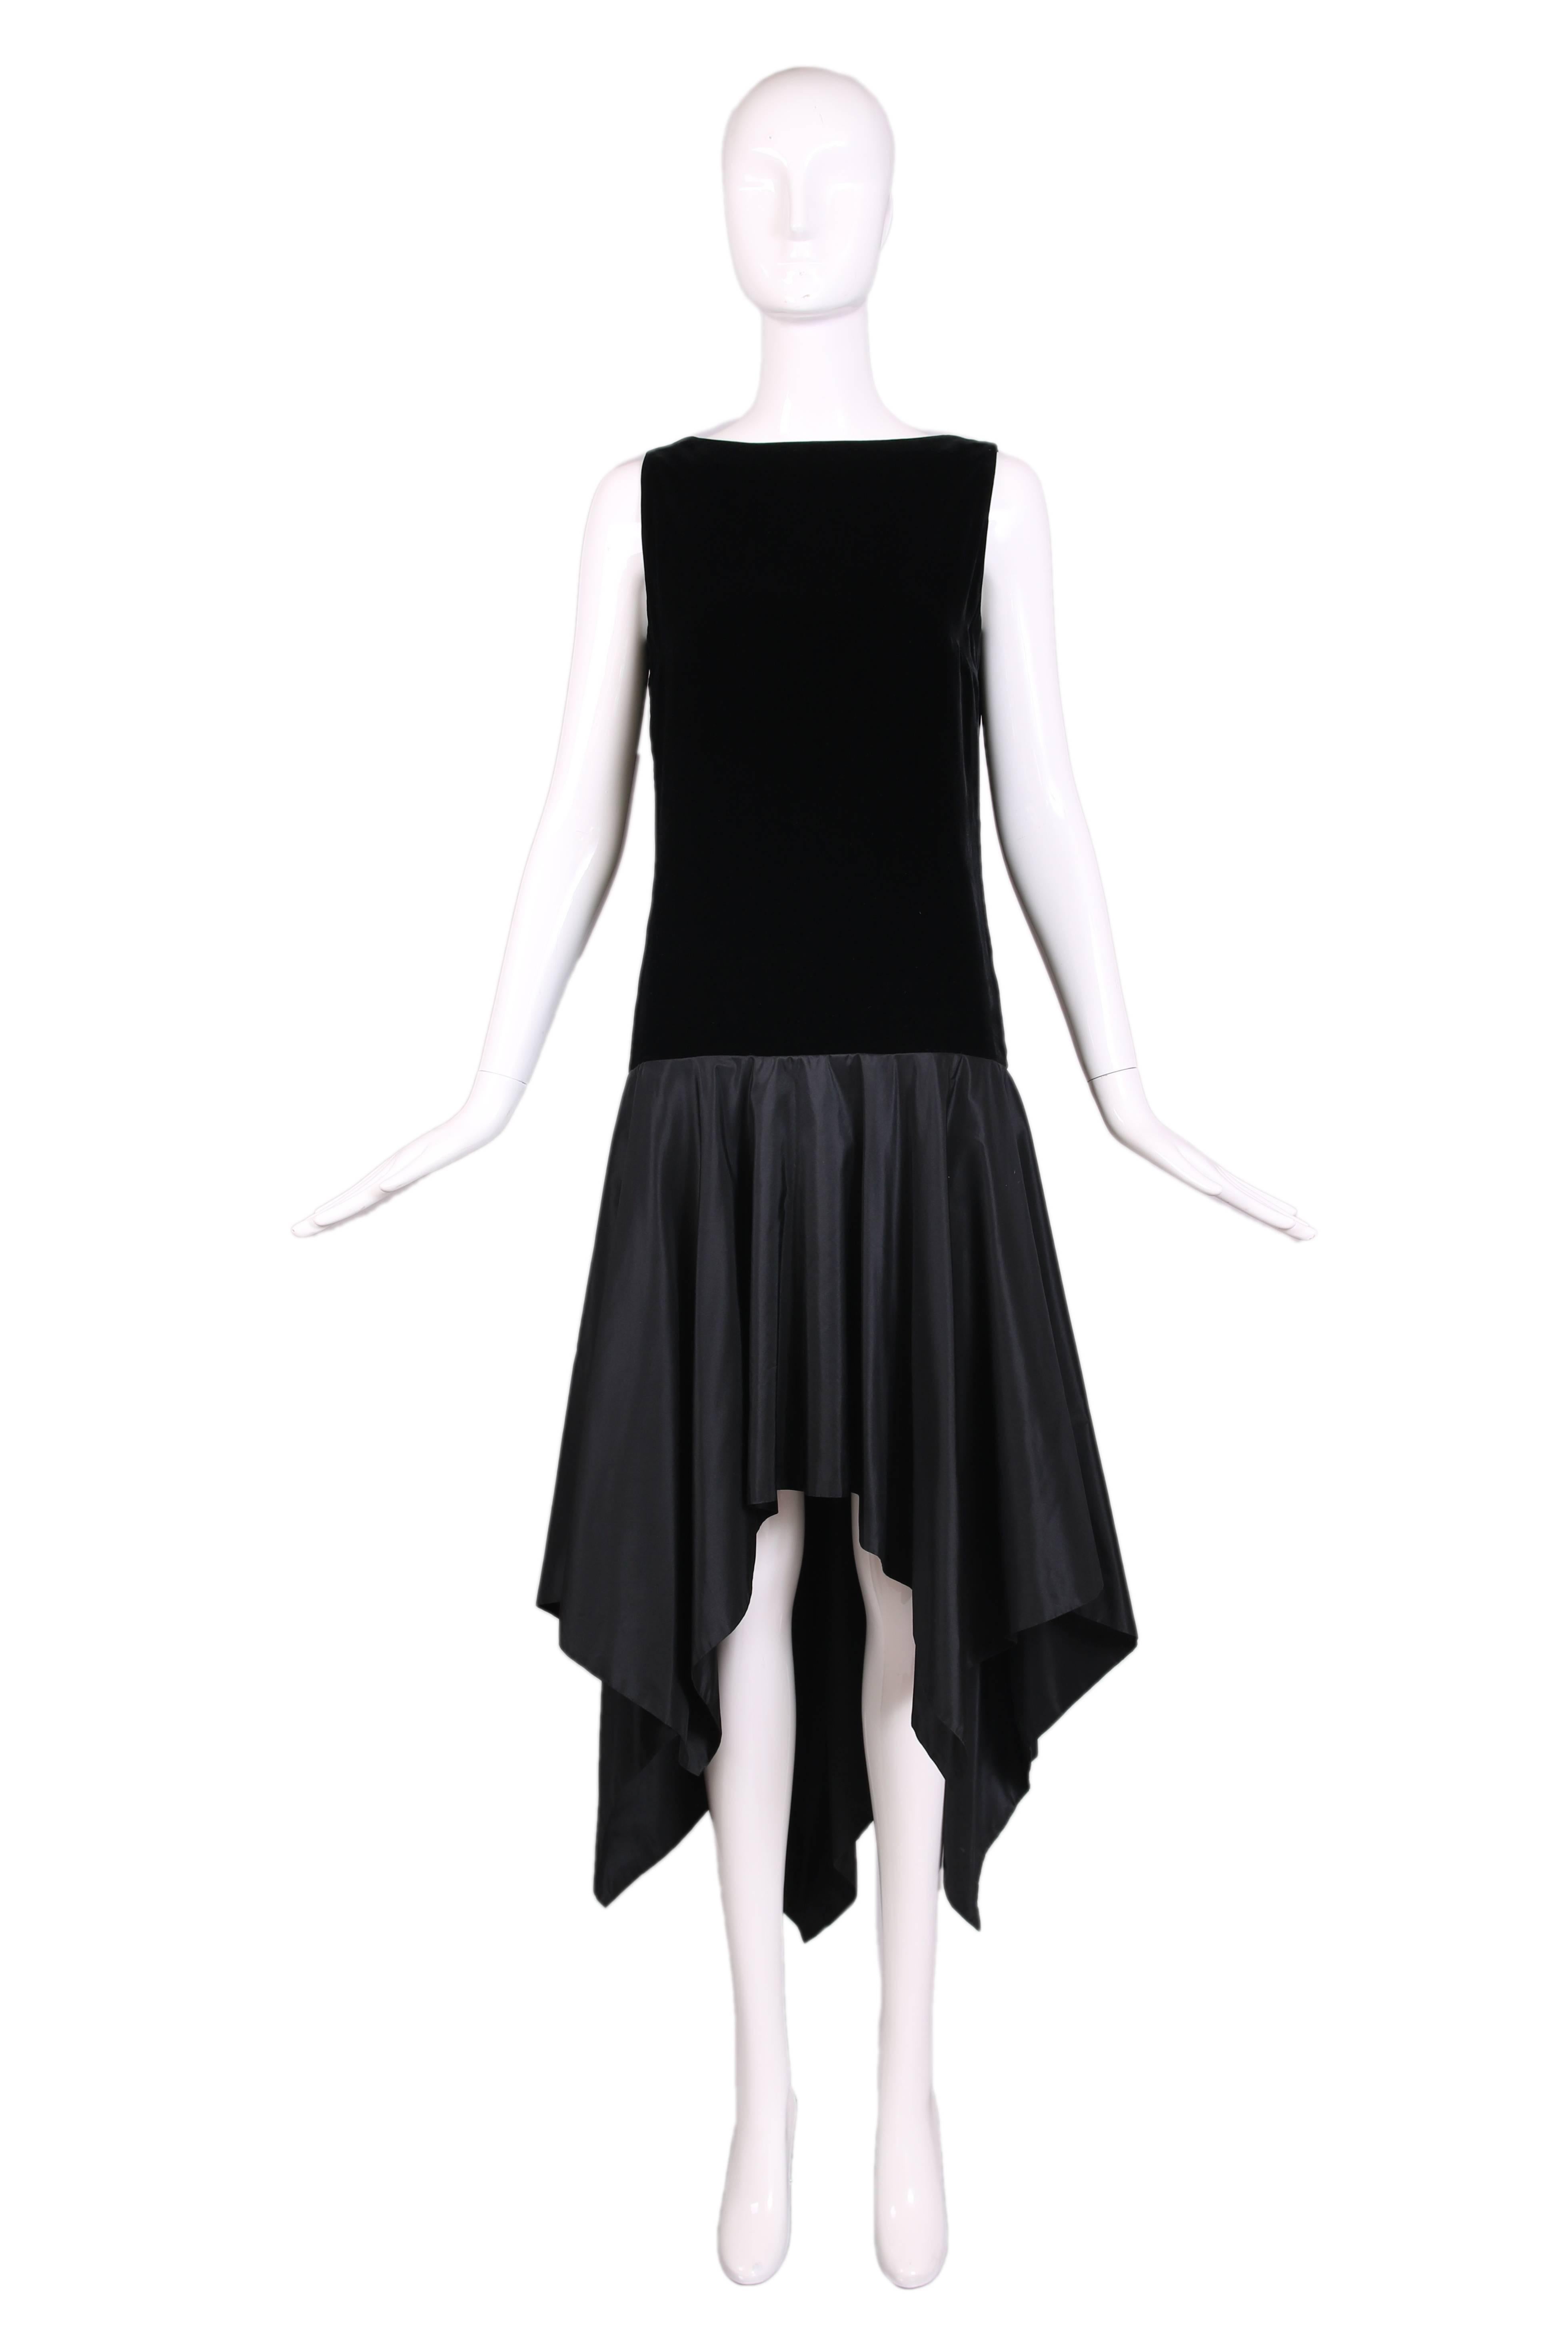 Ca. 1983 Lanvin haute couture black sleeveless cocktail dress featuring a velvet bodice with dropped waist with a deep V at bodice back and a silk taffeta skirt featuring a high-low, handkerchief hem. In excellent condition. 
MEASUREMENTS:
Bust -